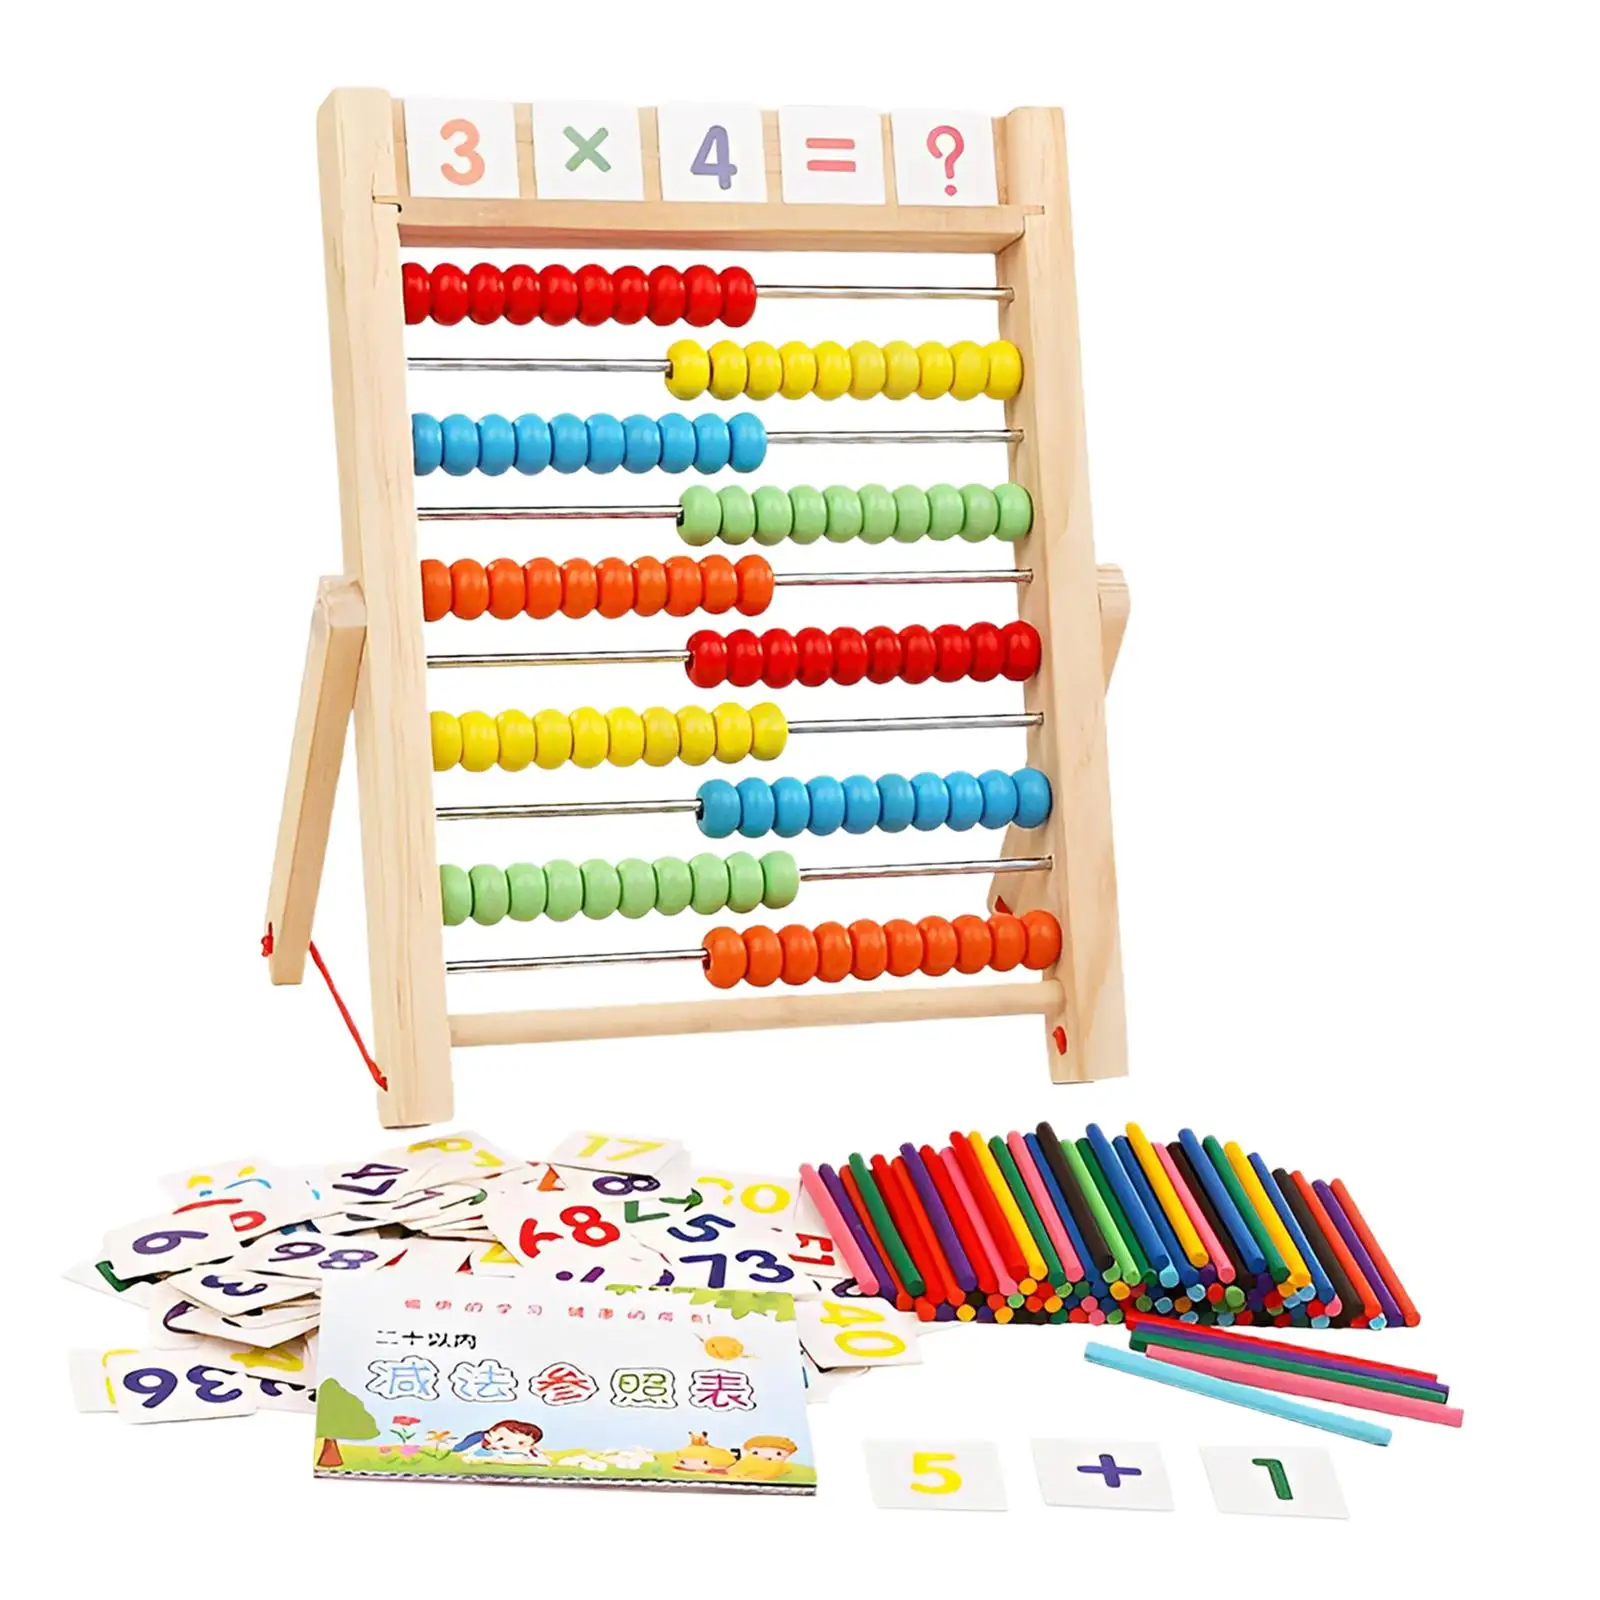 Add Subtract Abacus Bead Arithmetic Abacus Number Learning Educational Counting Toy for Toddlers Kids Boys Girls Preschool